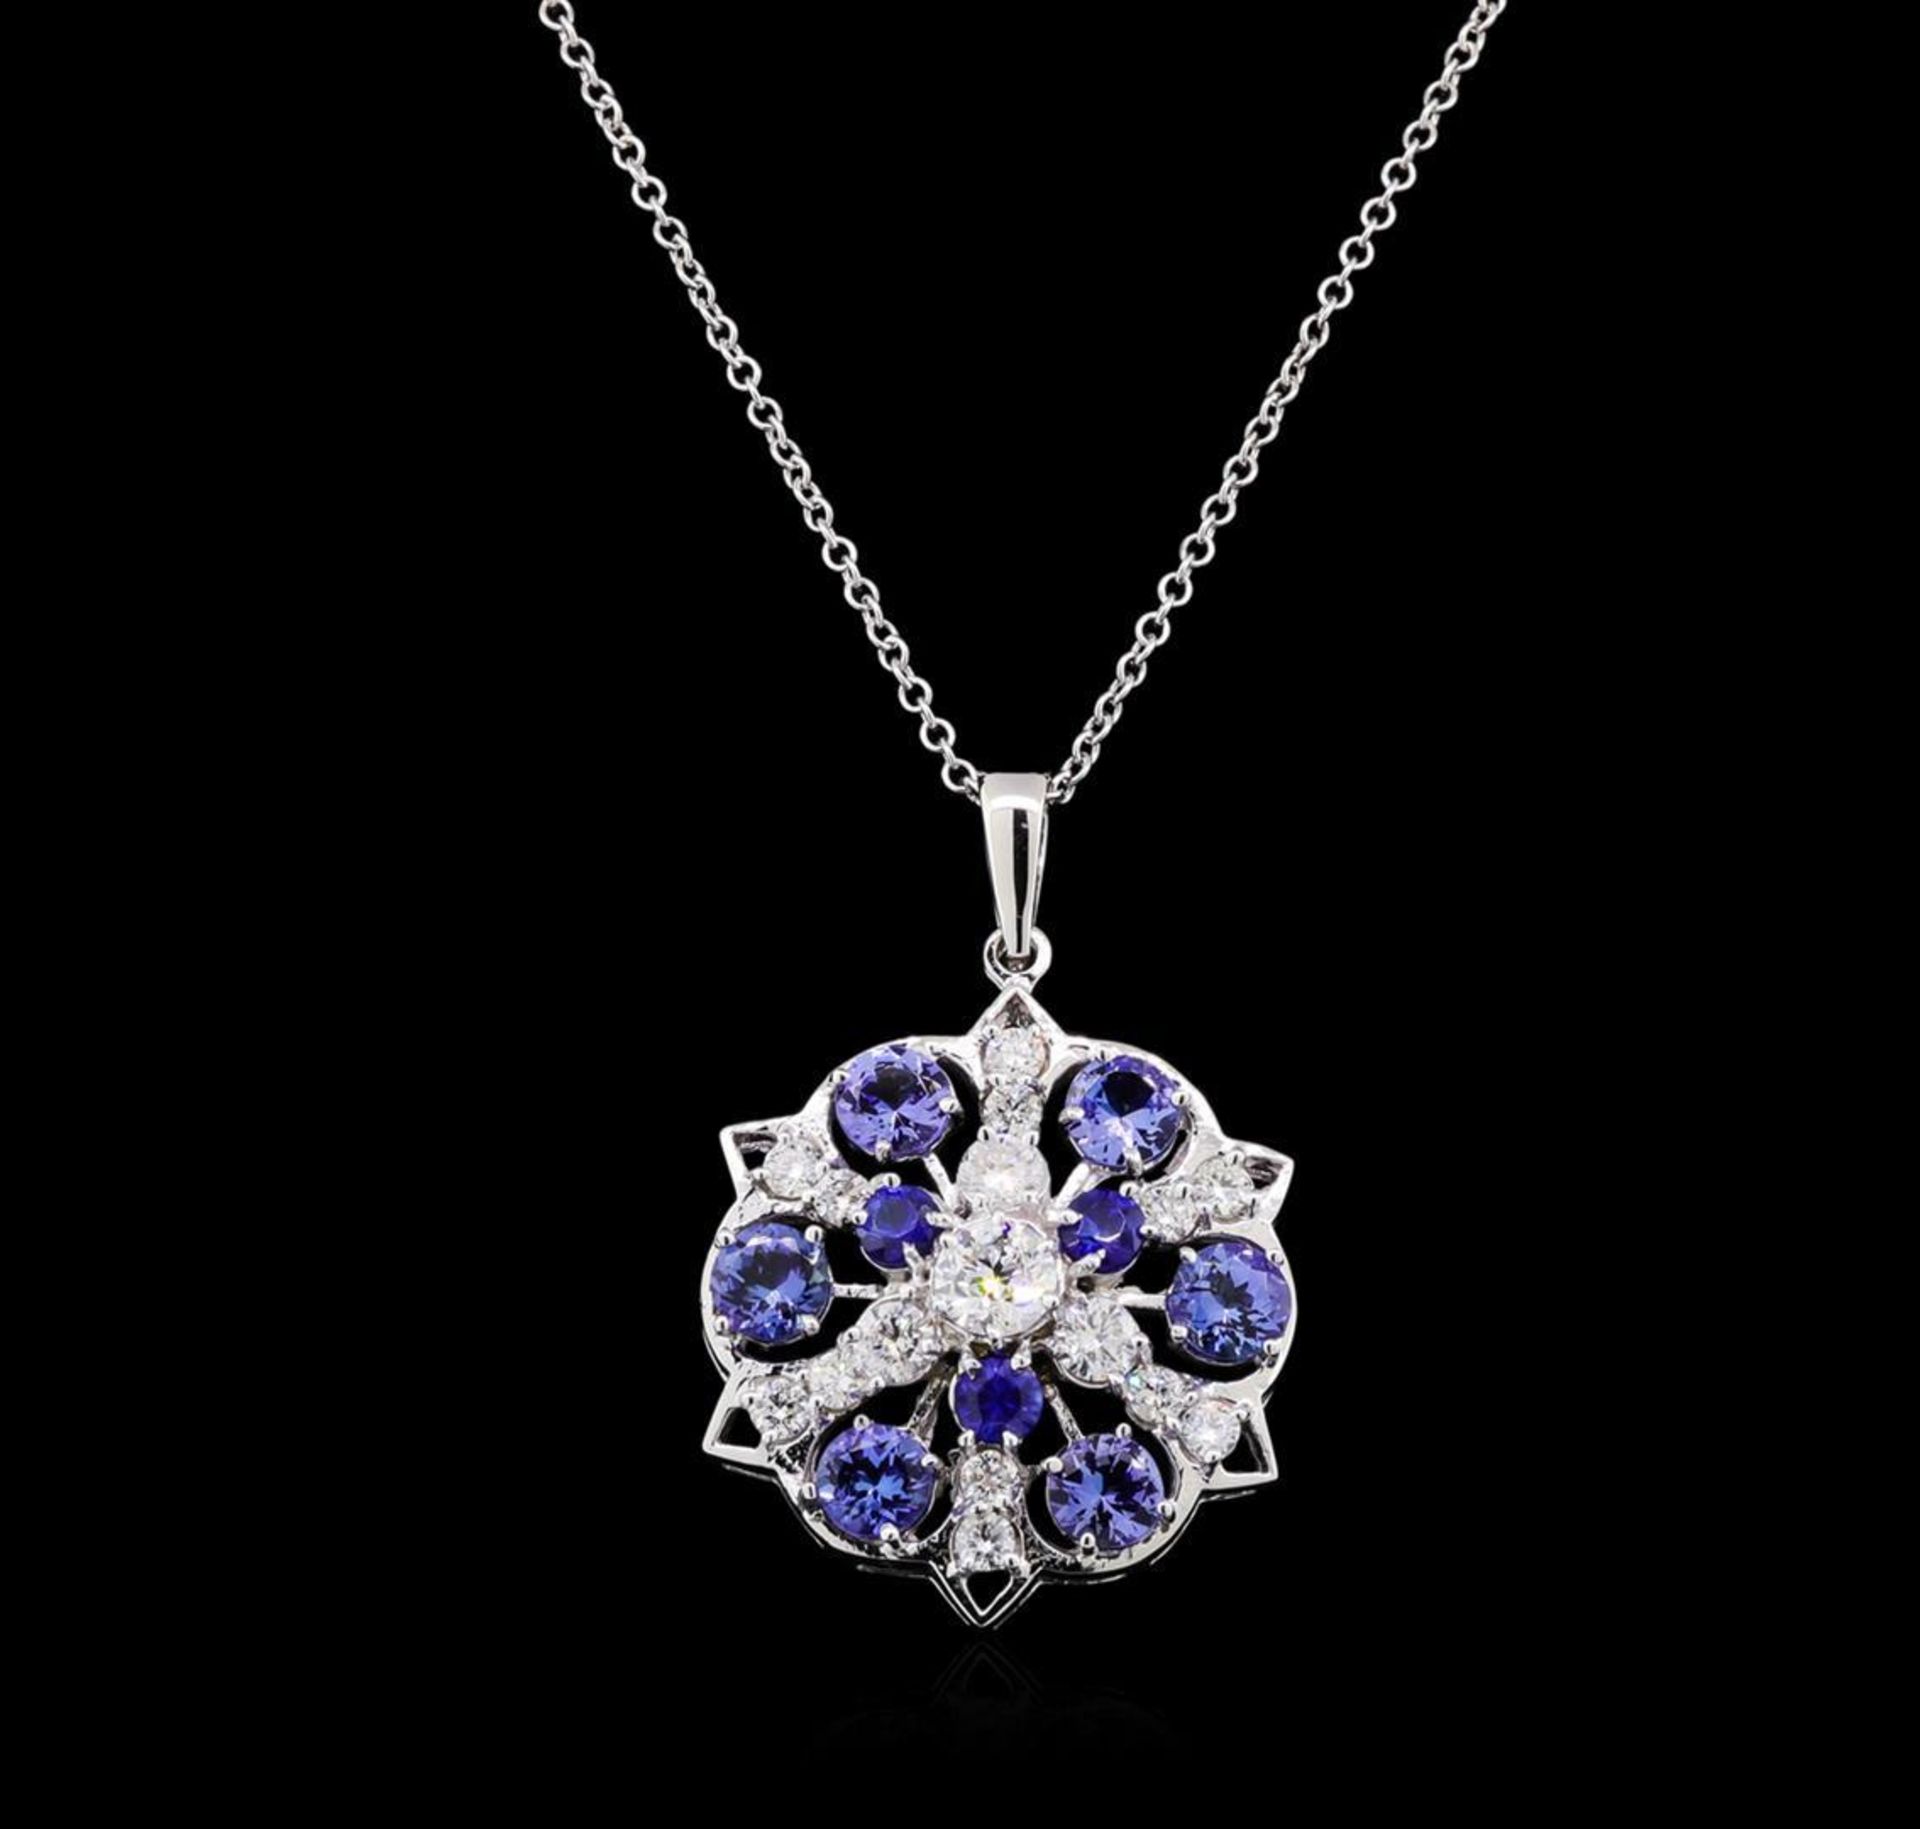 2.88 ctw Tanzanite, Sapphire and Diamond Necklace - 14KT White Gold - Image 2 of 4